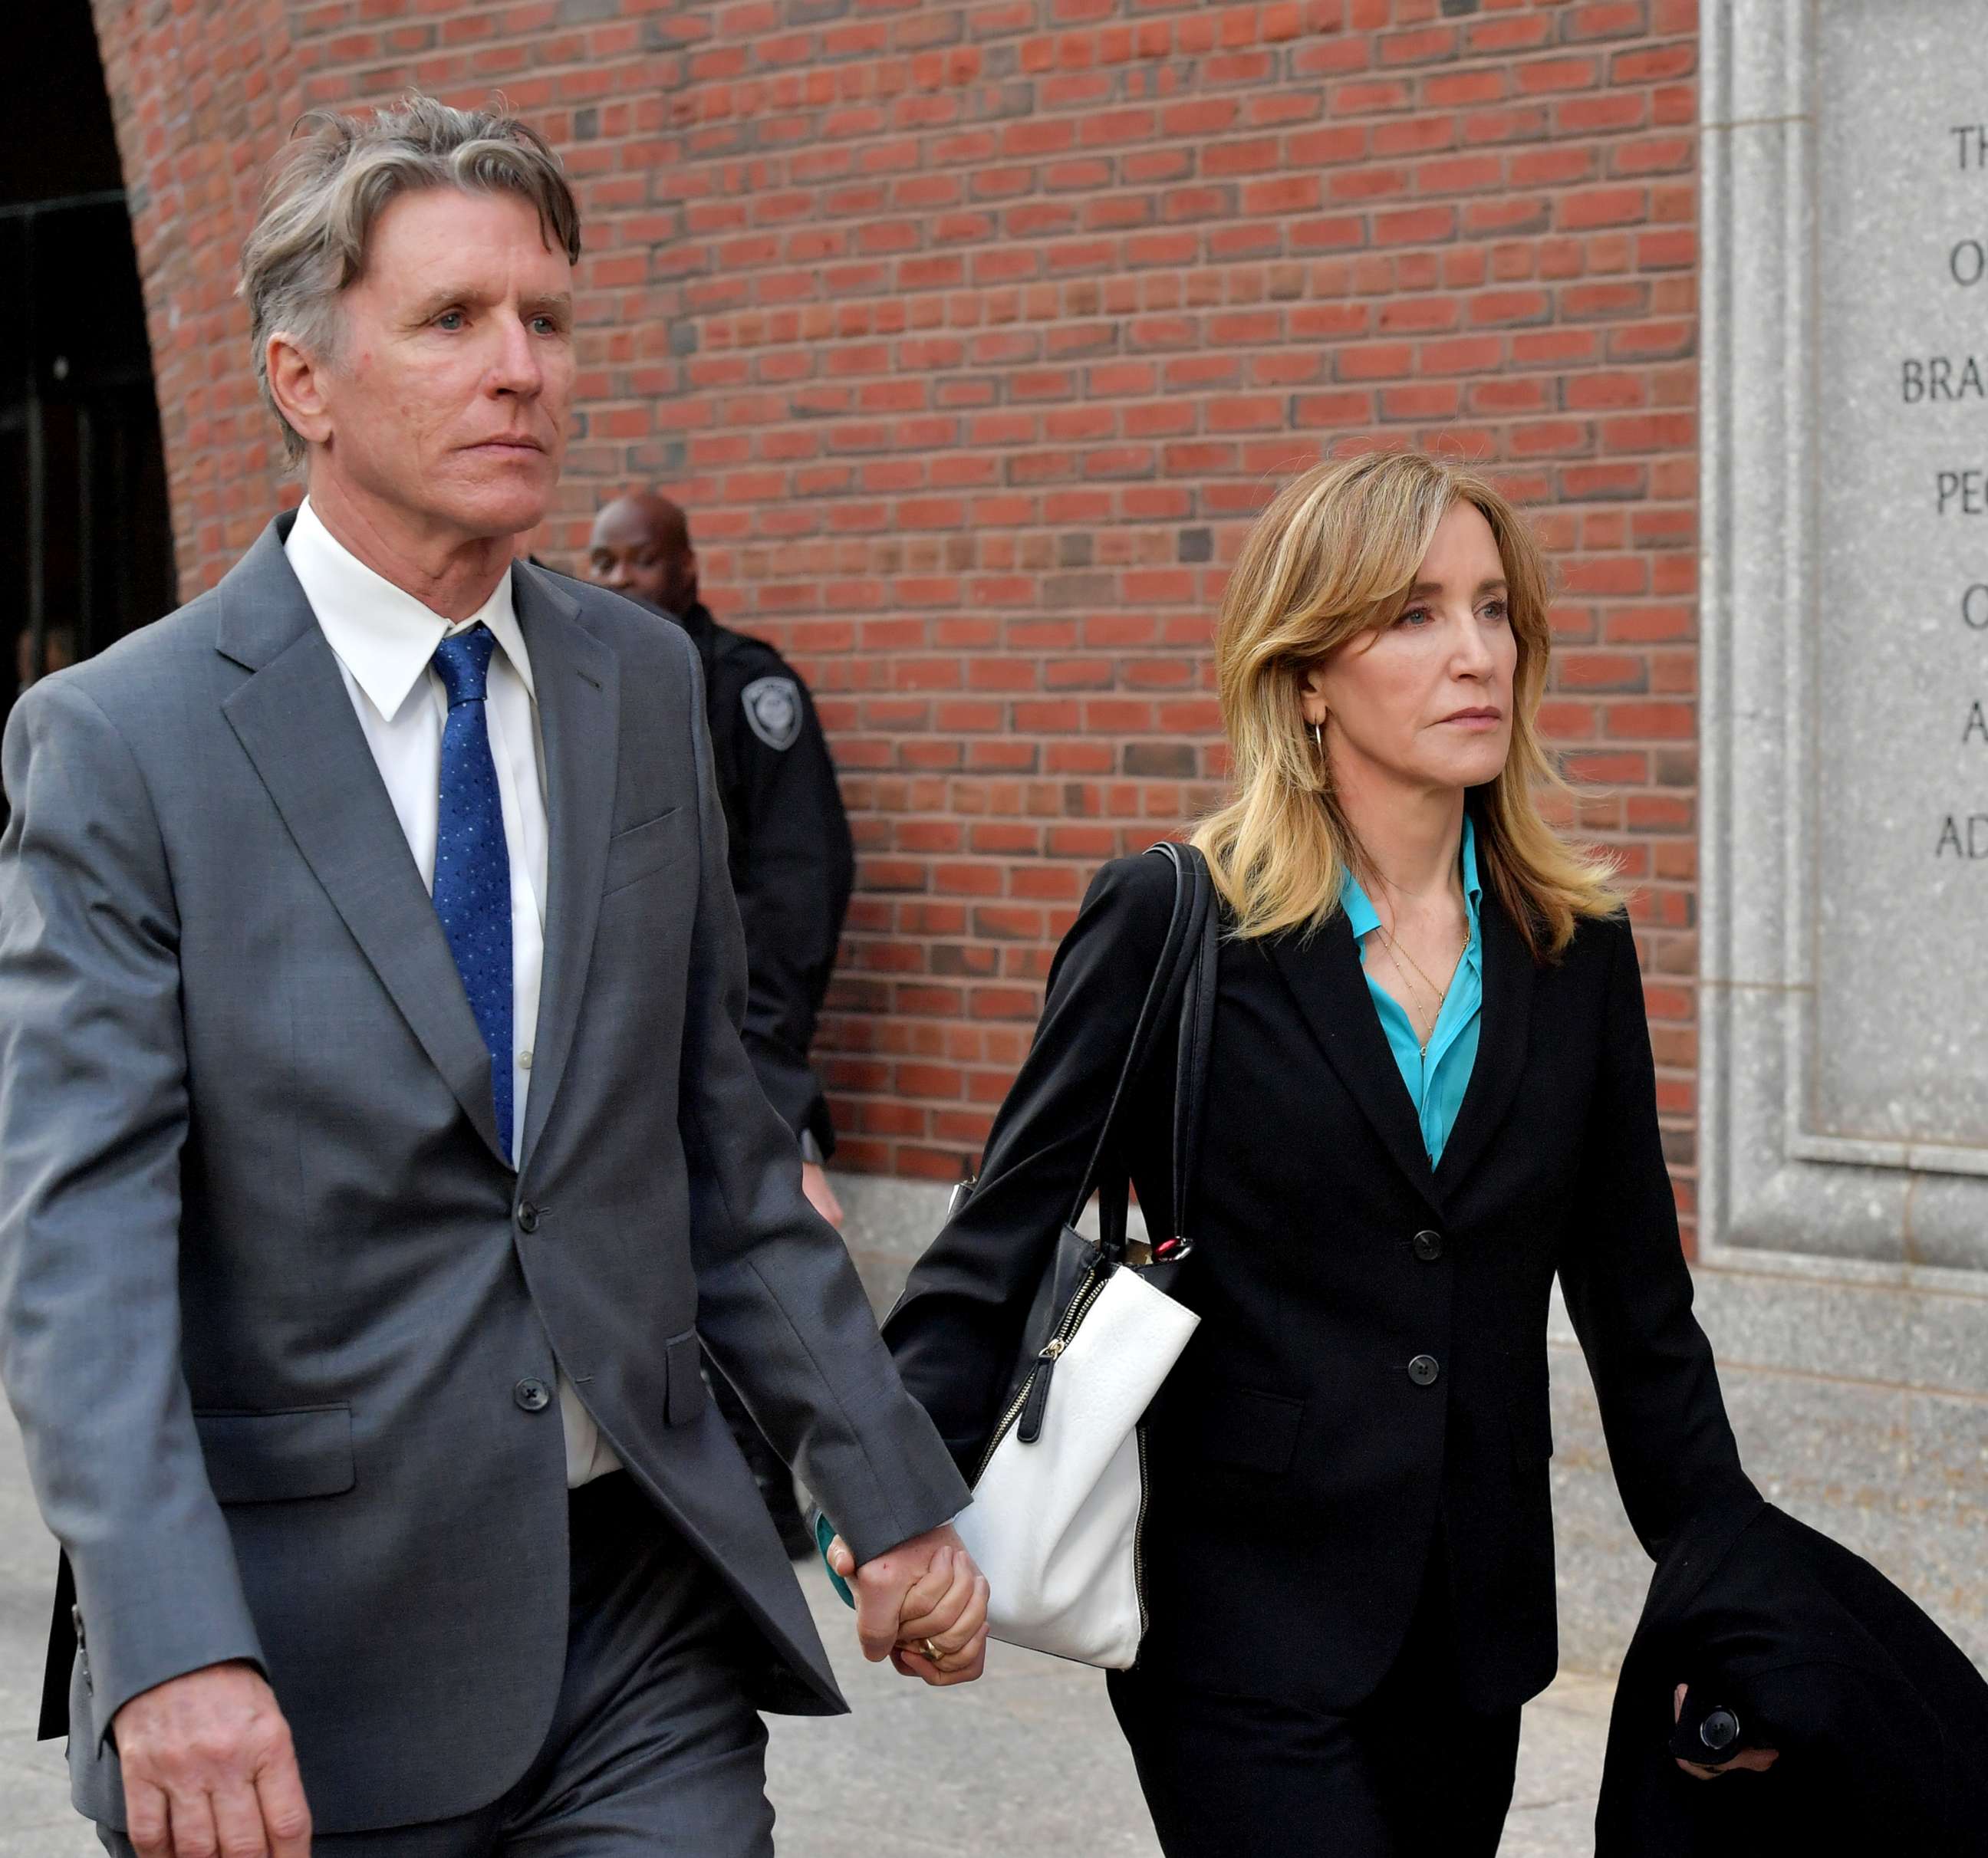 PHOTO:Felicity Huffman exits the John Joseph Moakley U.S. Courthouse after appearing in Federal Court to answer charges stemming from college admissions scandal, April 3, 2019,in Boston.